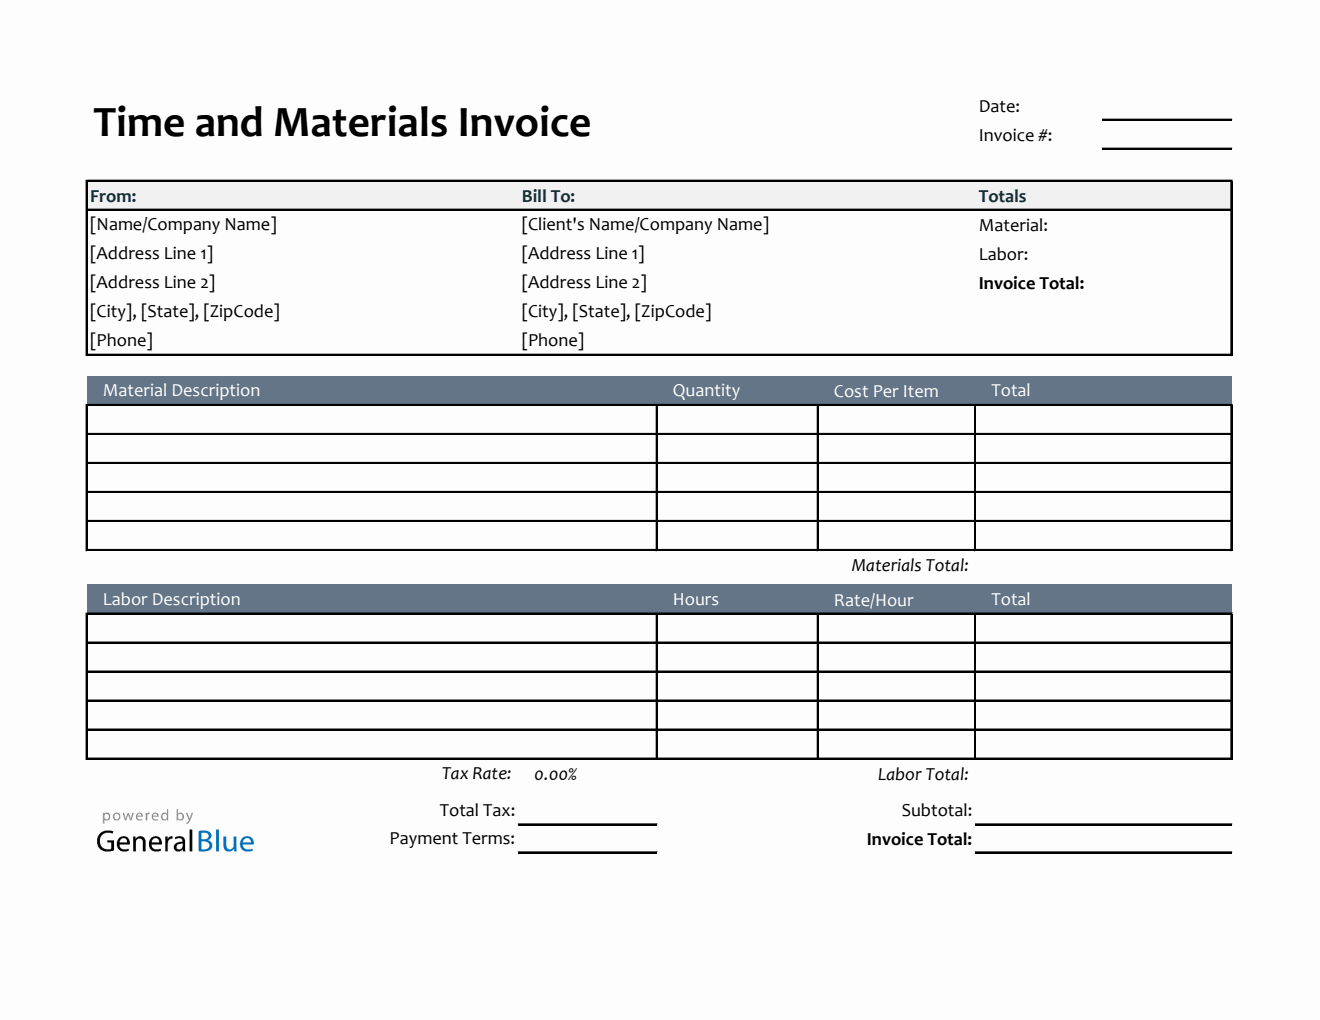 Printable Time and Materials Invoice in Excel (Colorful)